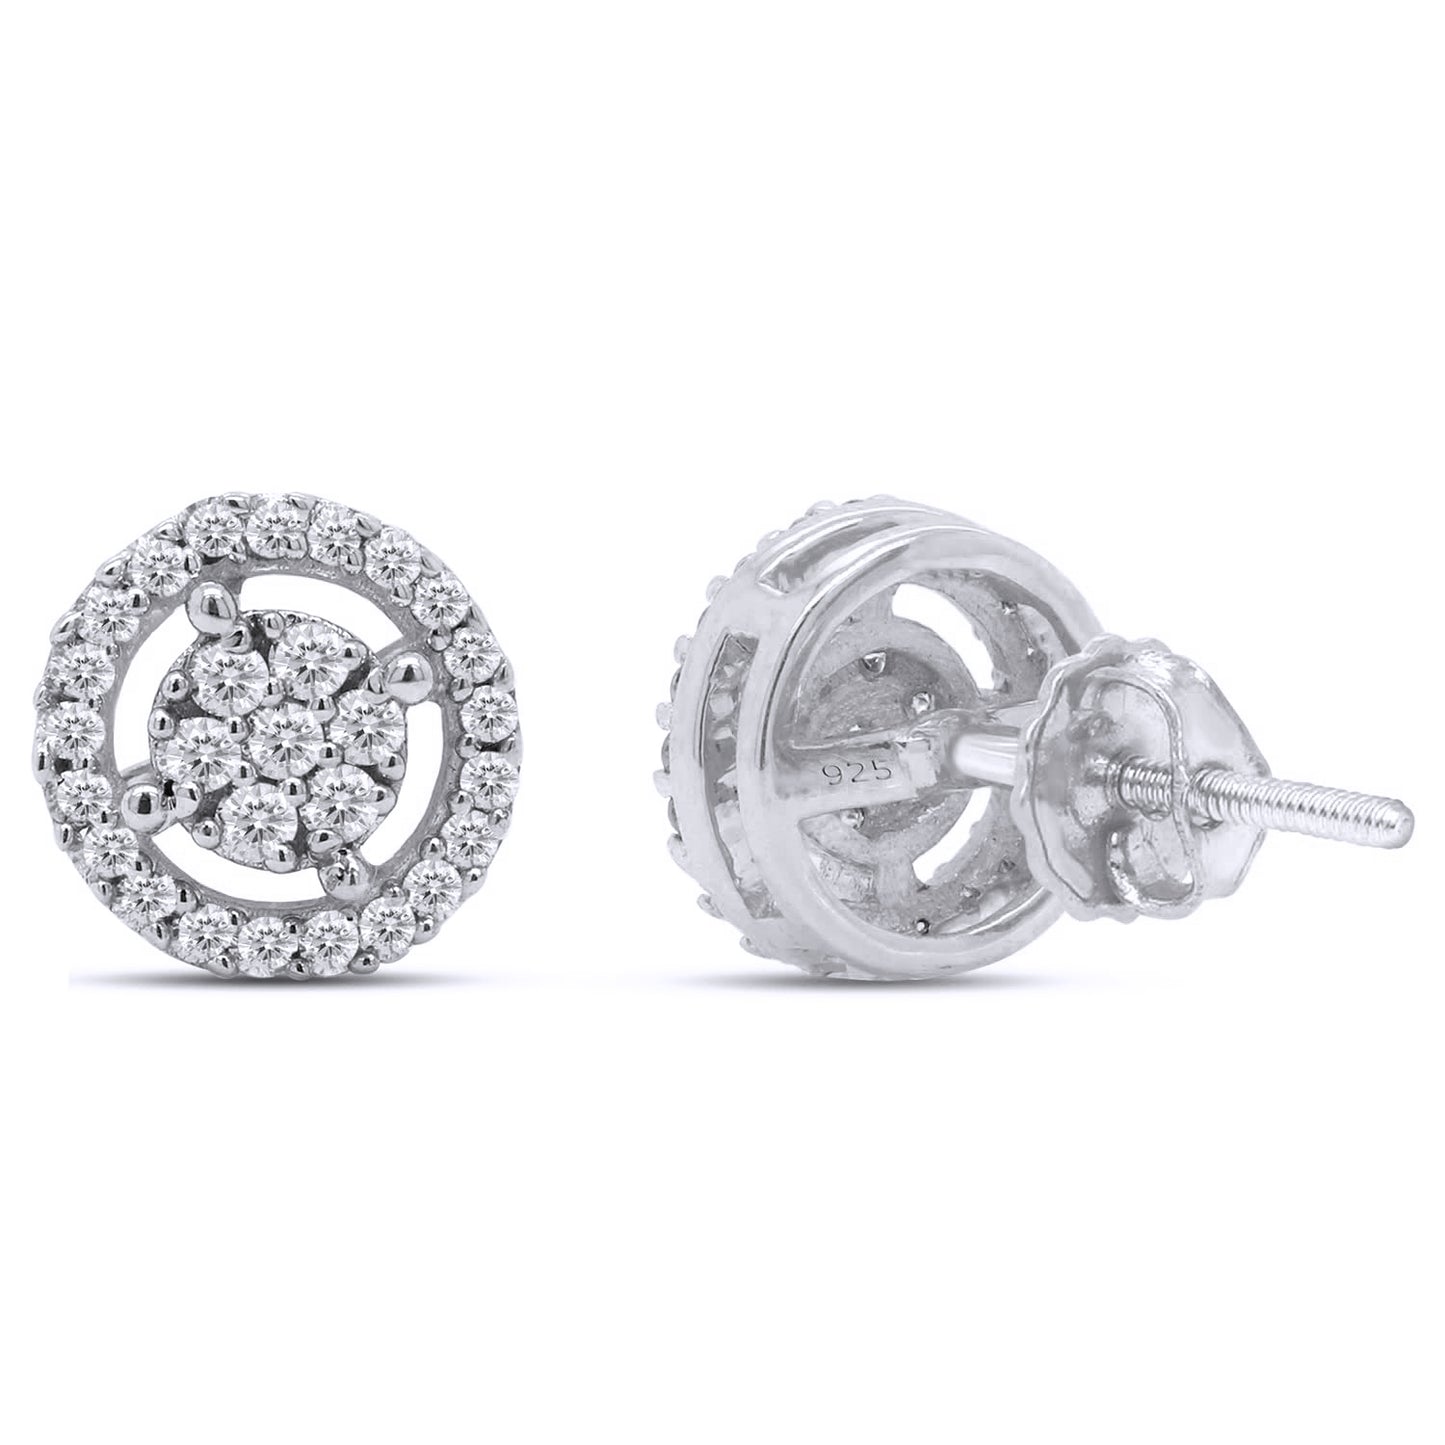 0.25 Carat Round Cut Lab Created Moissanite Diamond Circle Stud Earrings In 925 Sterling Silver Jewelry For Women